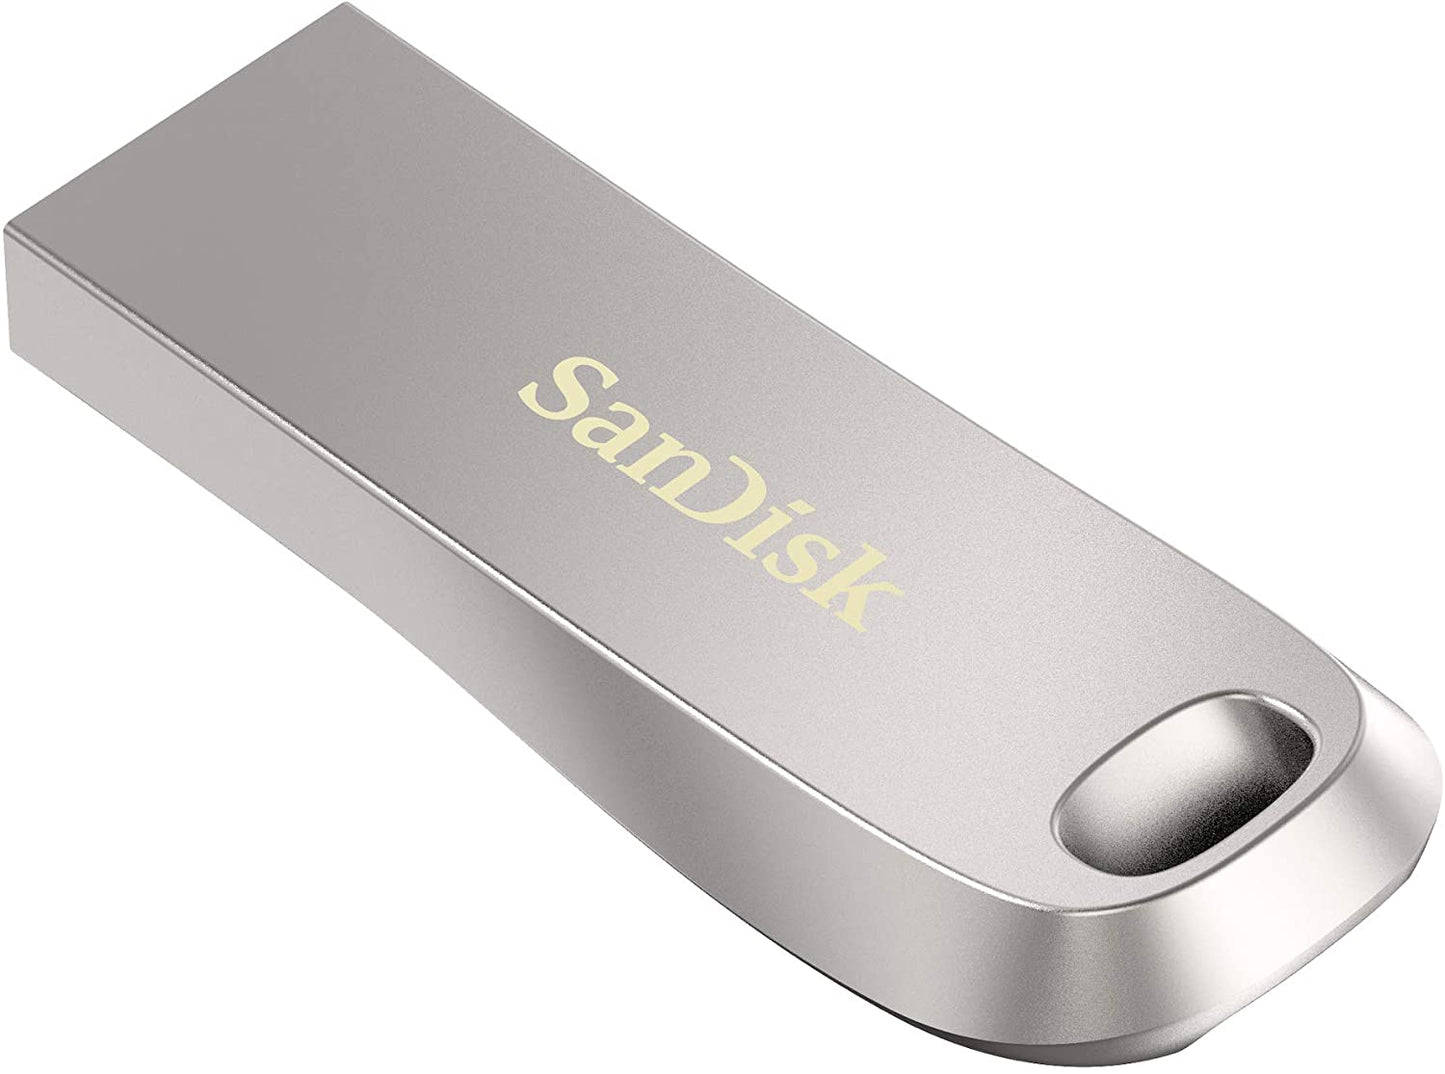 SanDisk Ultra Luxe 16GB / 32GB / 64GB / 128GB / 256GB USB 3.1 Flash Drive with 150MB/s Read Speed SDCZ74-016G-G46, SDCZ74-032G-G46, SDCZ74-064G-G46, SDCZ74-128G-G46, SDCZ74-256G-G46